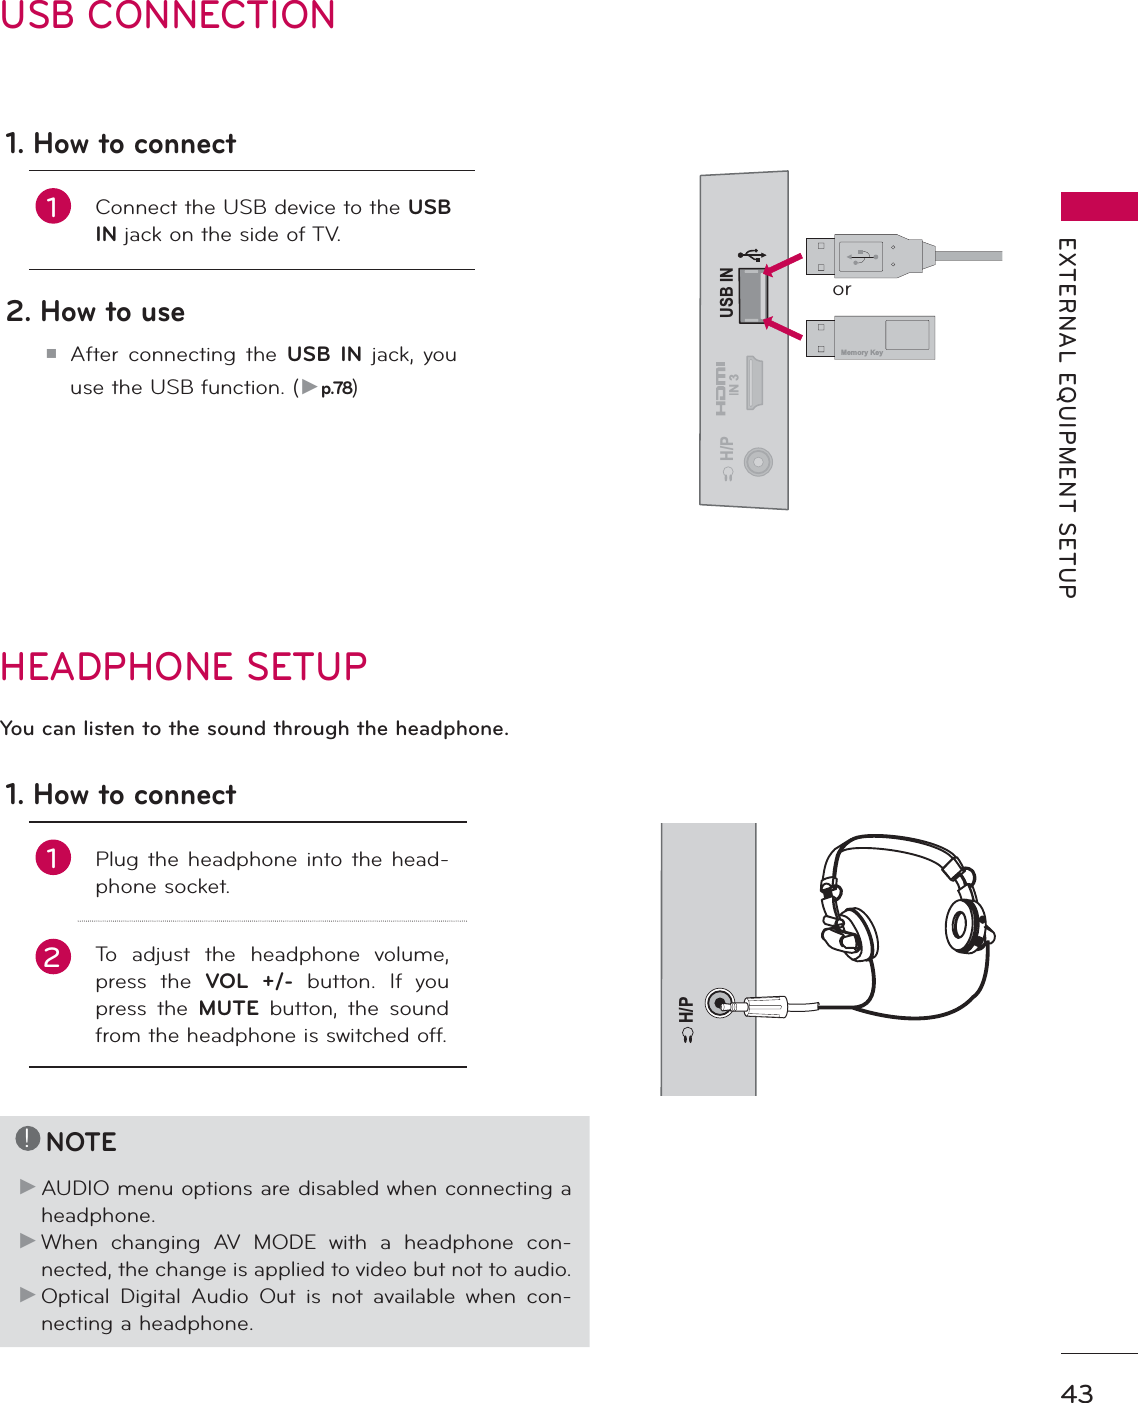 43EXTERNAL EQUIPMENT SETUPUSB CONNECTIONUSB ININ 3H/PMemory Keyor1. How to connect1Connect the USB device to the USBIN jack on the side of TV. 2. How to useᯫAfter connecting the USB IN jack, you use the USB function. (Źp.78)HEADPHONE SETUP H/PYou can listen to the sound through the headphone.1. How to connect1Plug the headphone into the head-phone socket.2To adjust the headphone volume, press the VOL +/- button. If you press the MUTE button, the sound from the headphone is switched off.!NOTEŹAUDIO menu options are disabled when connecting a headphone.ŹWhen changing AV MODE with a headphone con-nected, the change is applied to video but not to audio.ŹOptical Digital Audio Out is not available when con-necting a headphone.